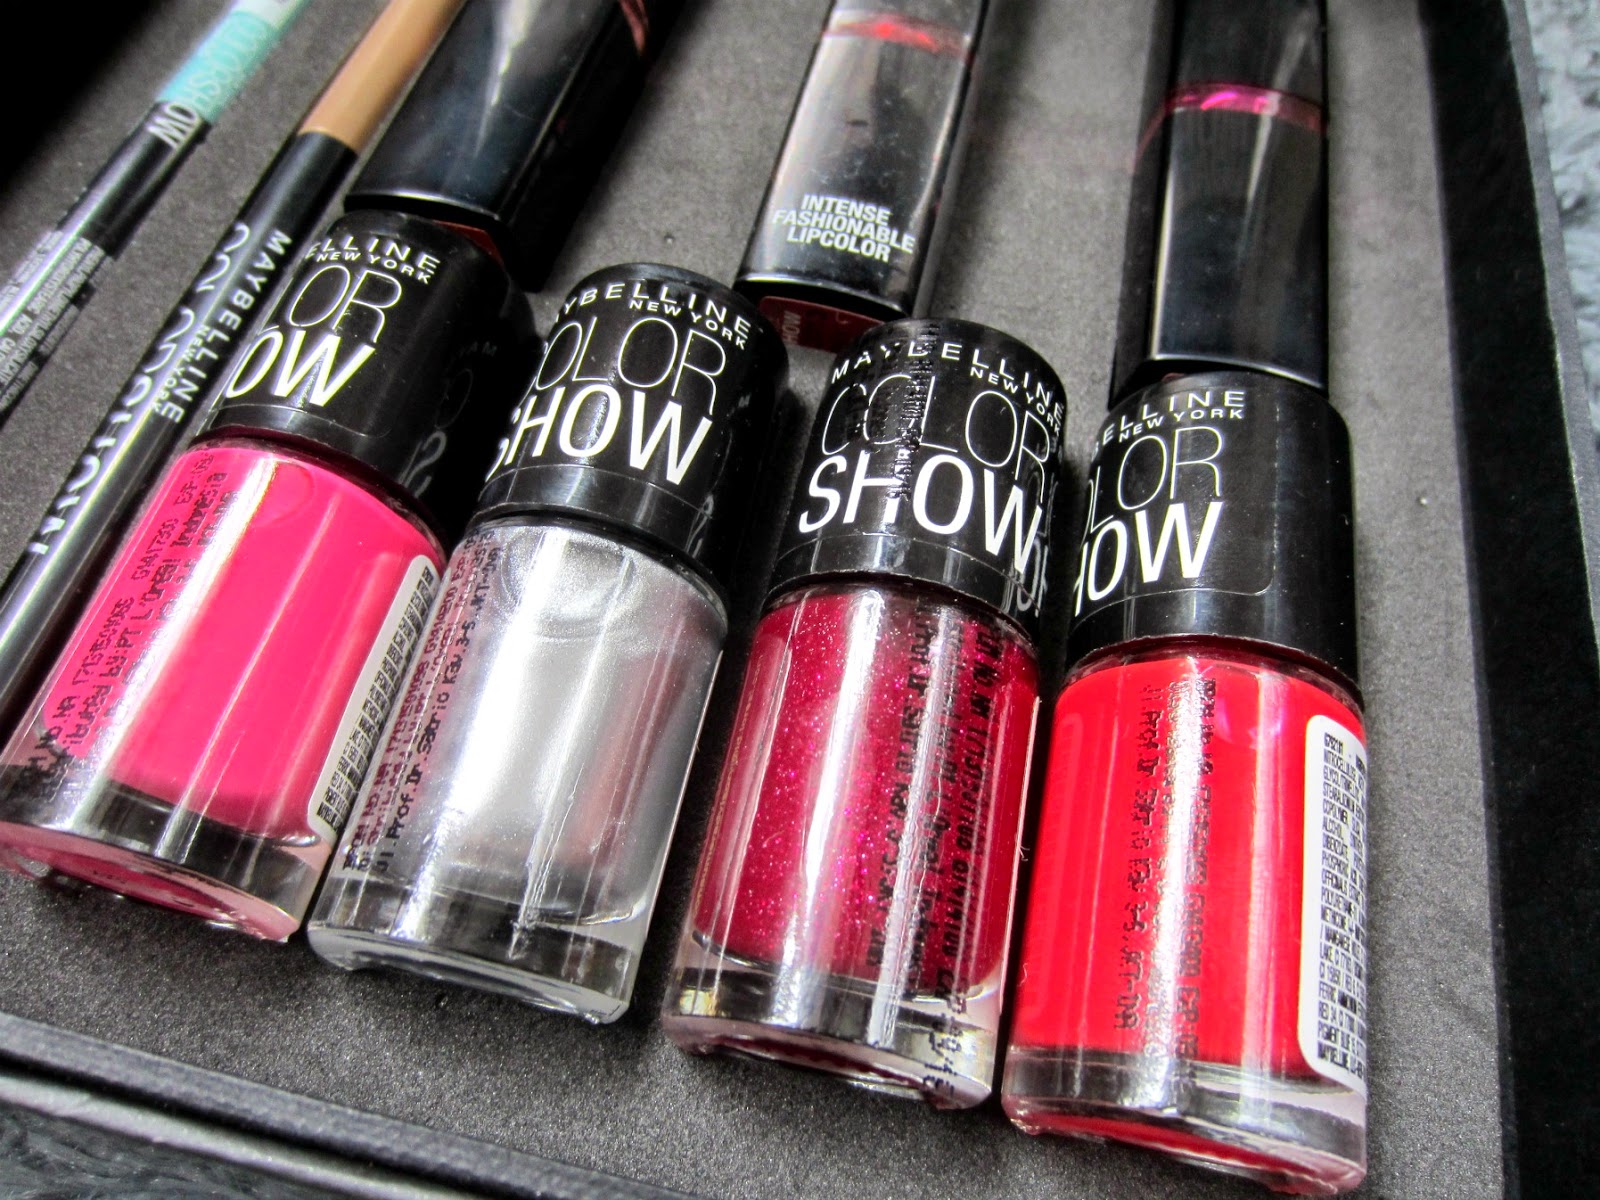 Maybelline Color Show Nail Polish - wide 6